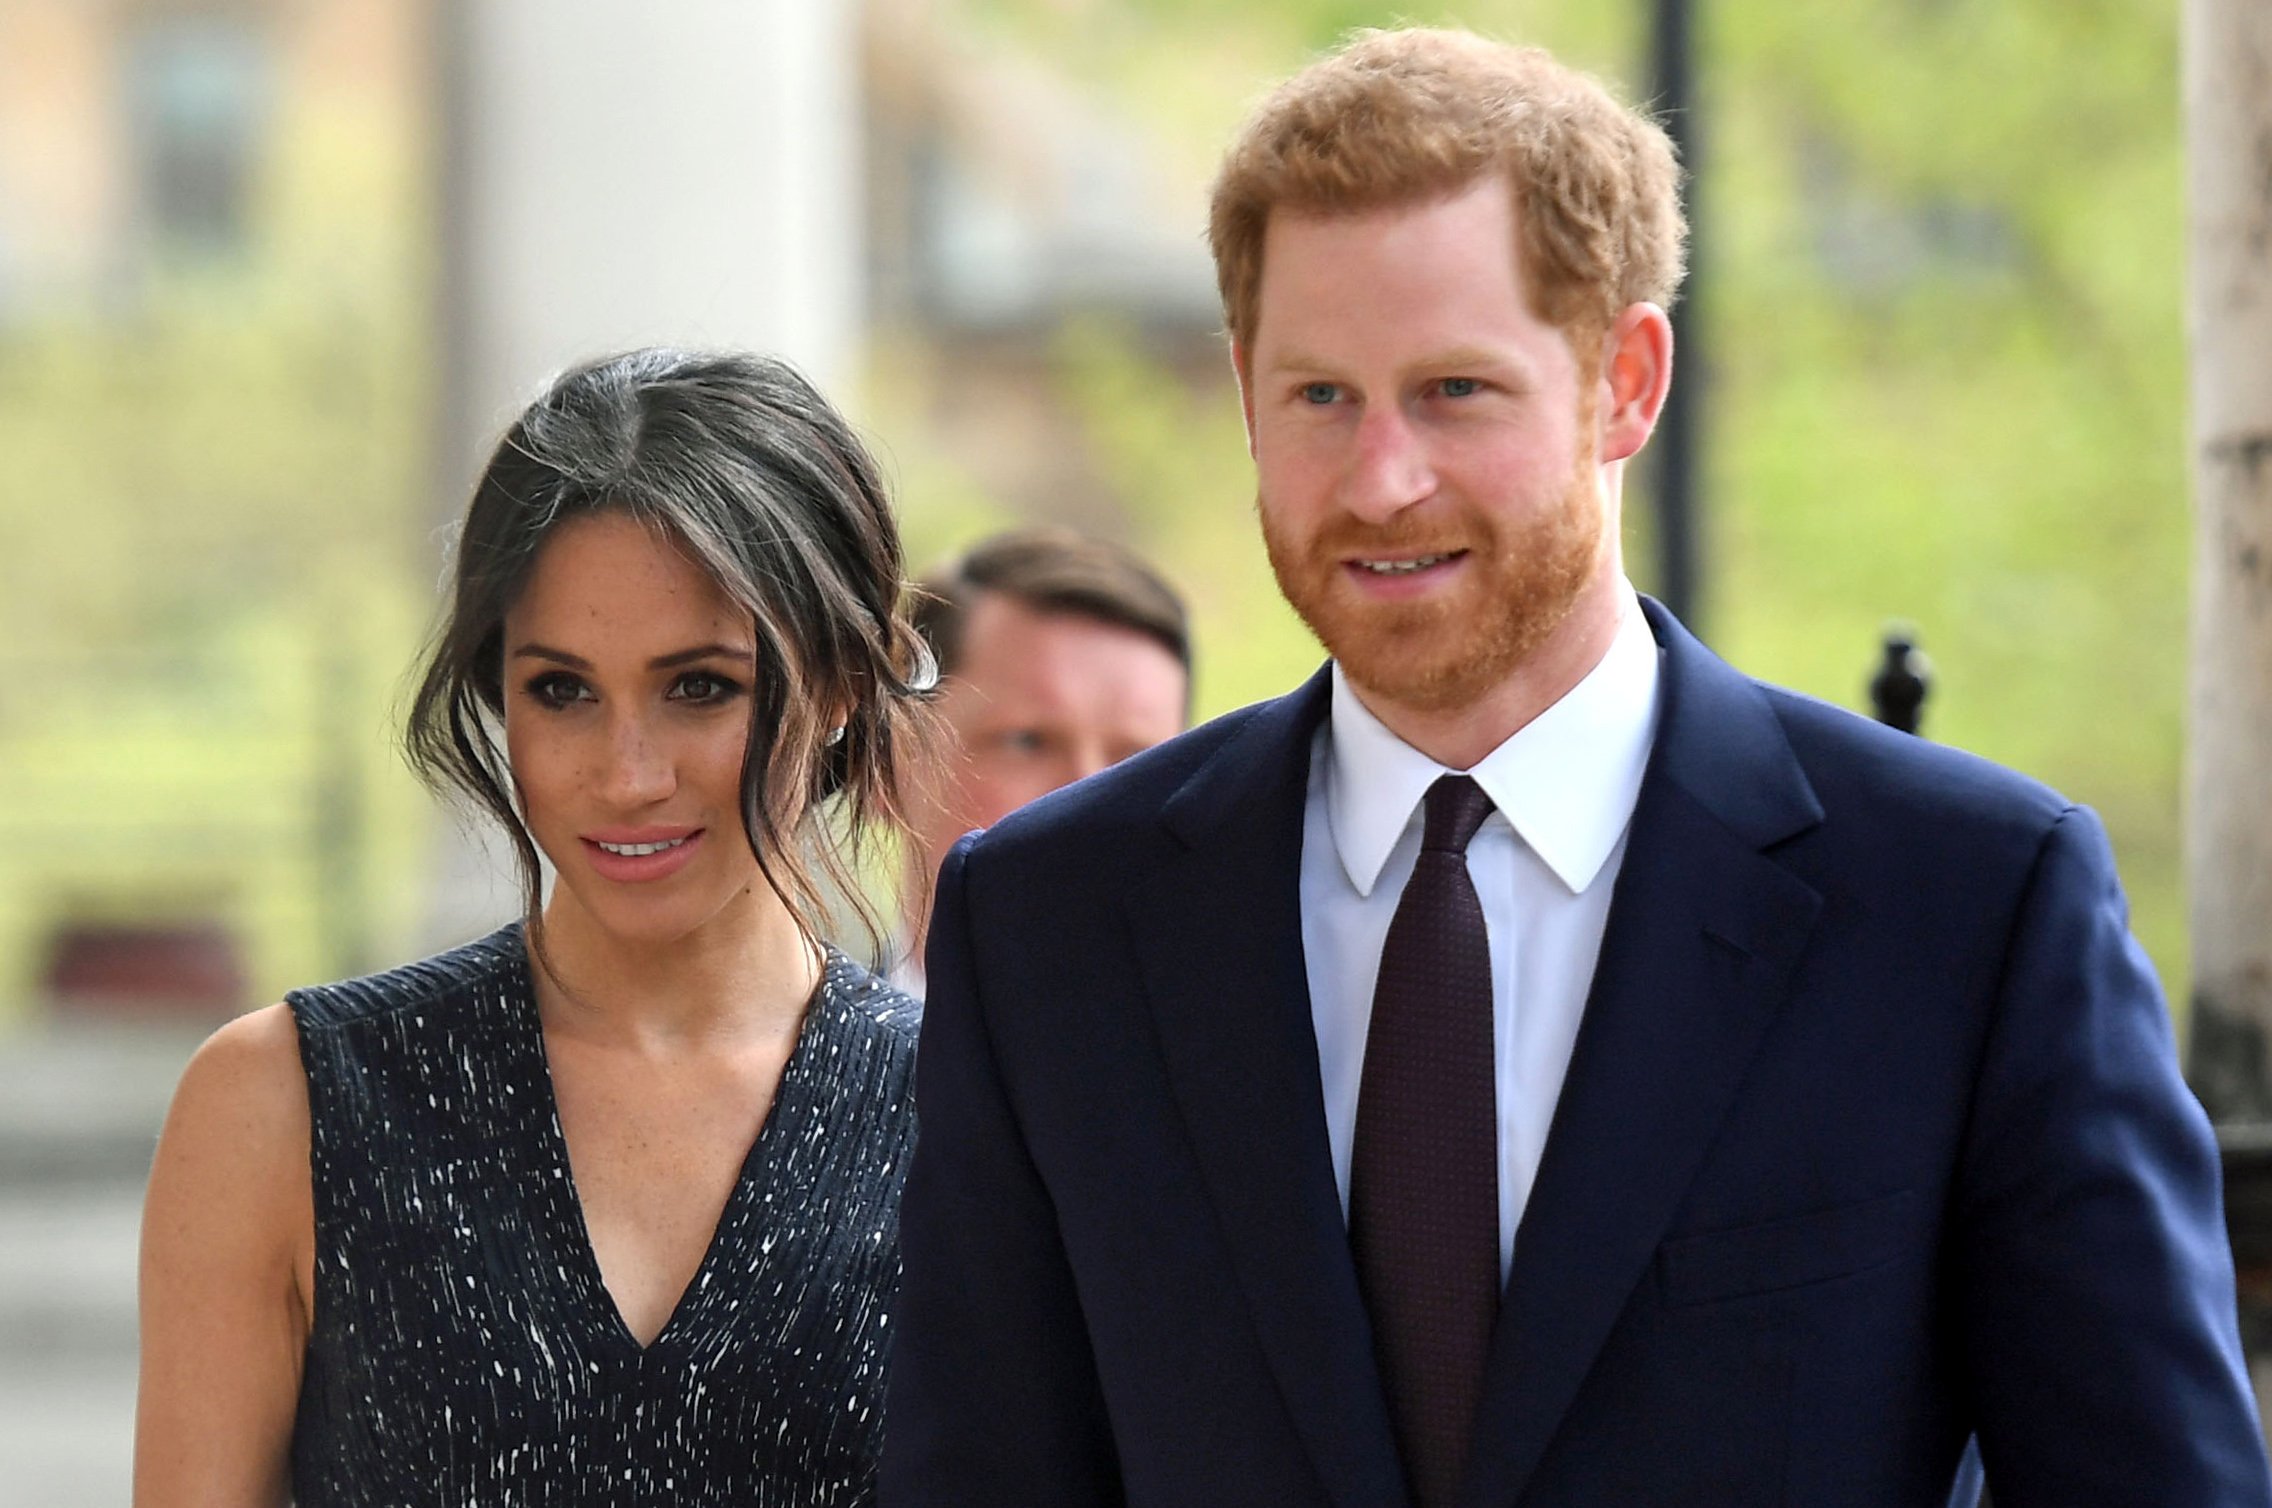 Meghan Markle and Prince Harry ‘Trade on Their Duke and Duchess Titles,’ Says Commentator